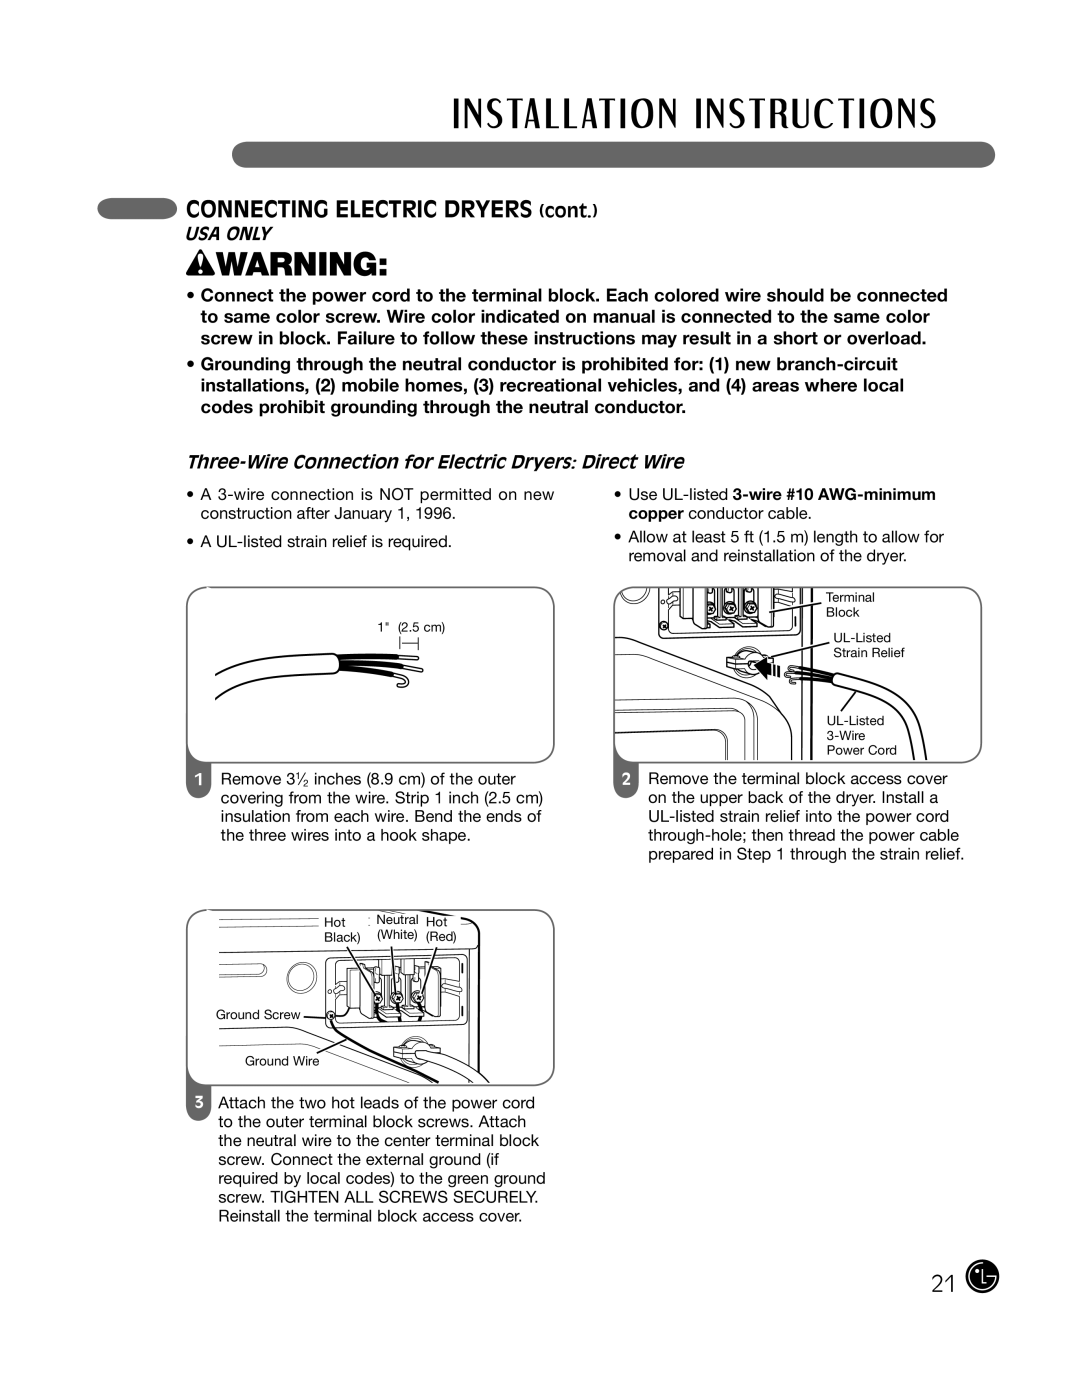 LG Electronics D2102L Three-Wire Connection for Electric Dryers Direct Wire, wWARNING, CONNECTING ELECTRIC DRYERS cont 